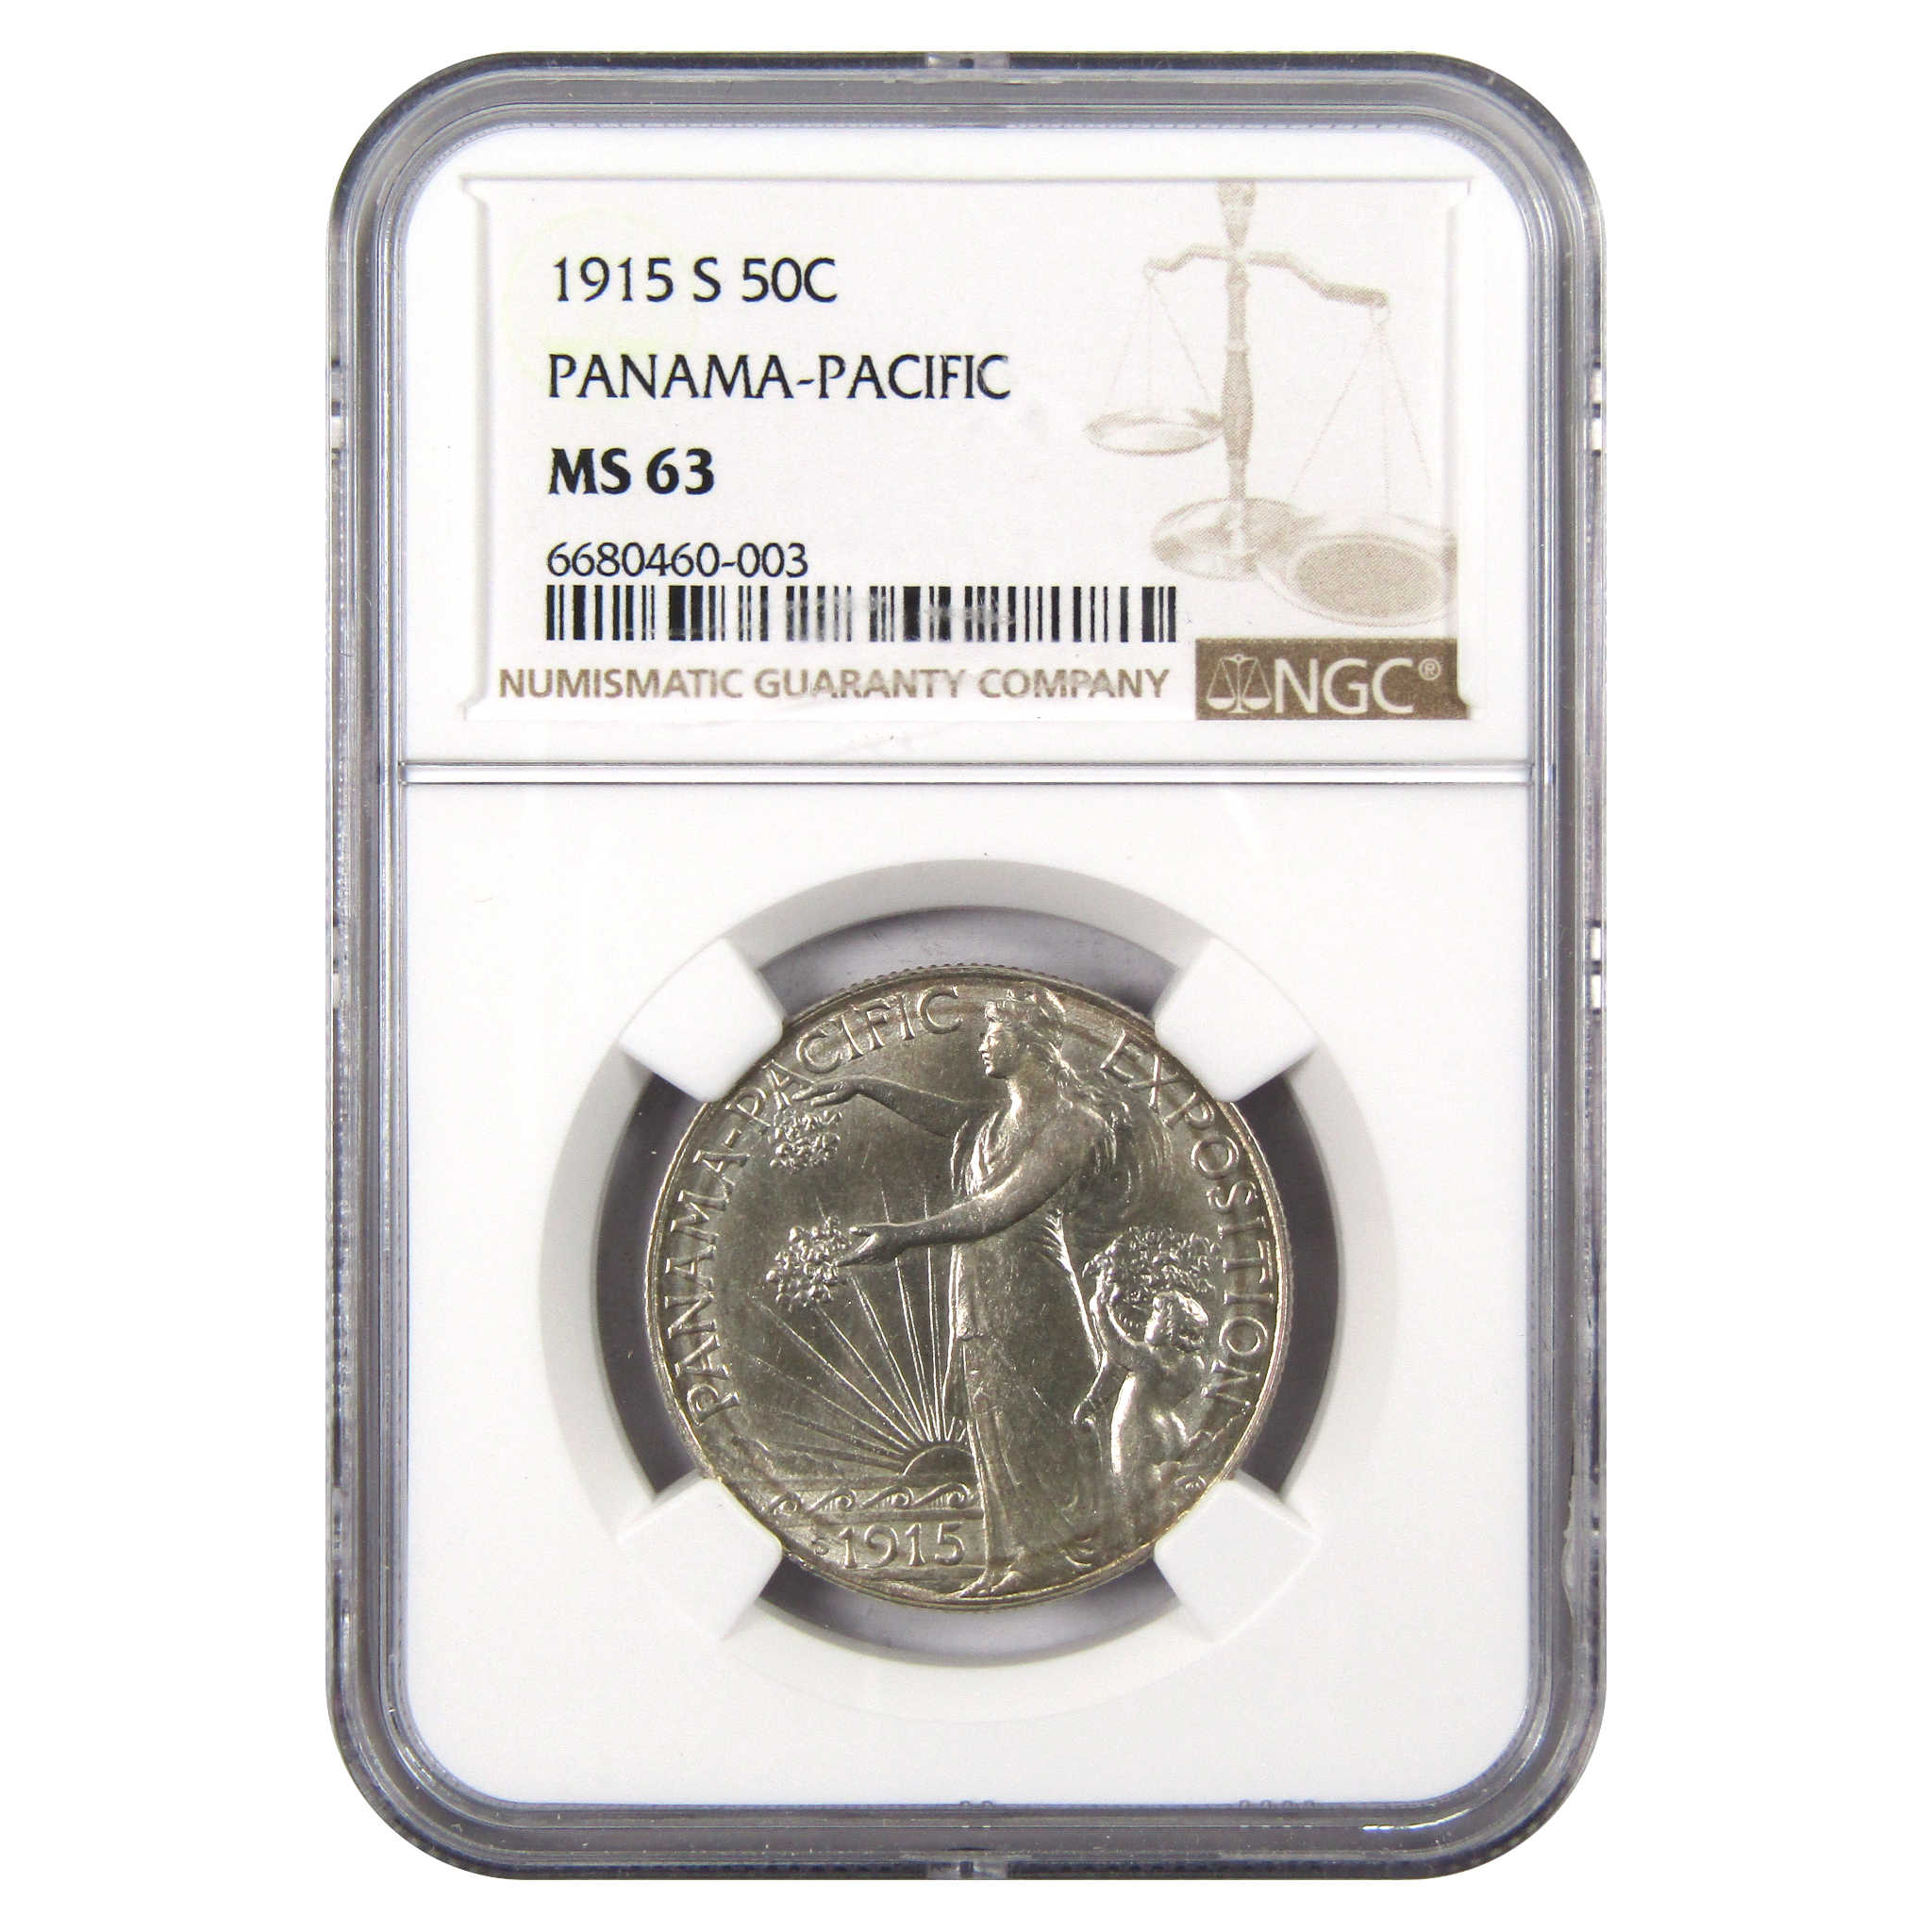 Panama-Pacific Commemorative 1915 S MS 63 NGC Silver Coin 